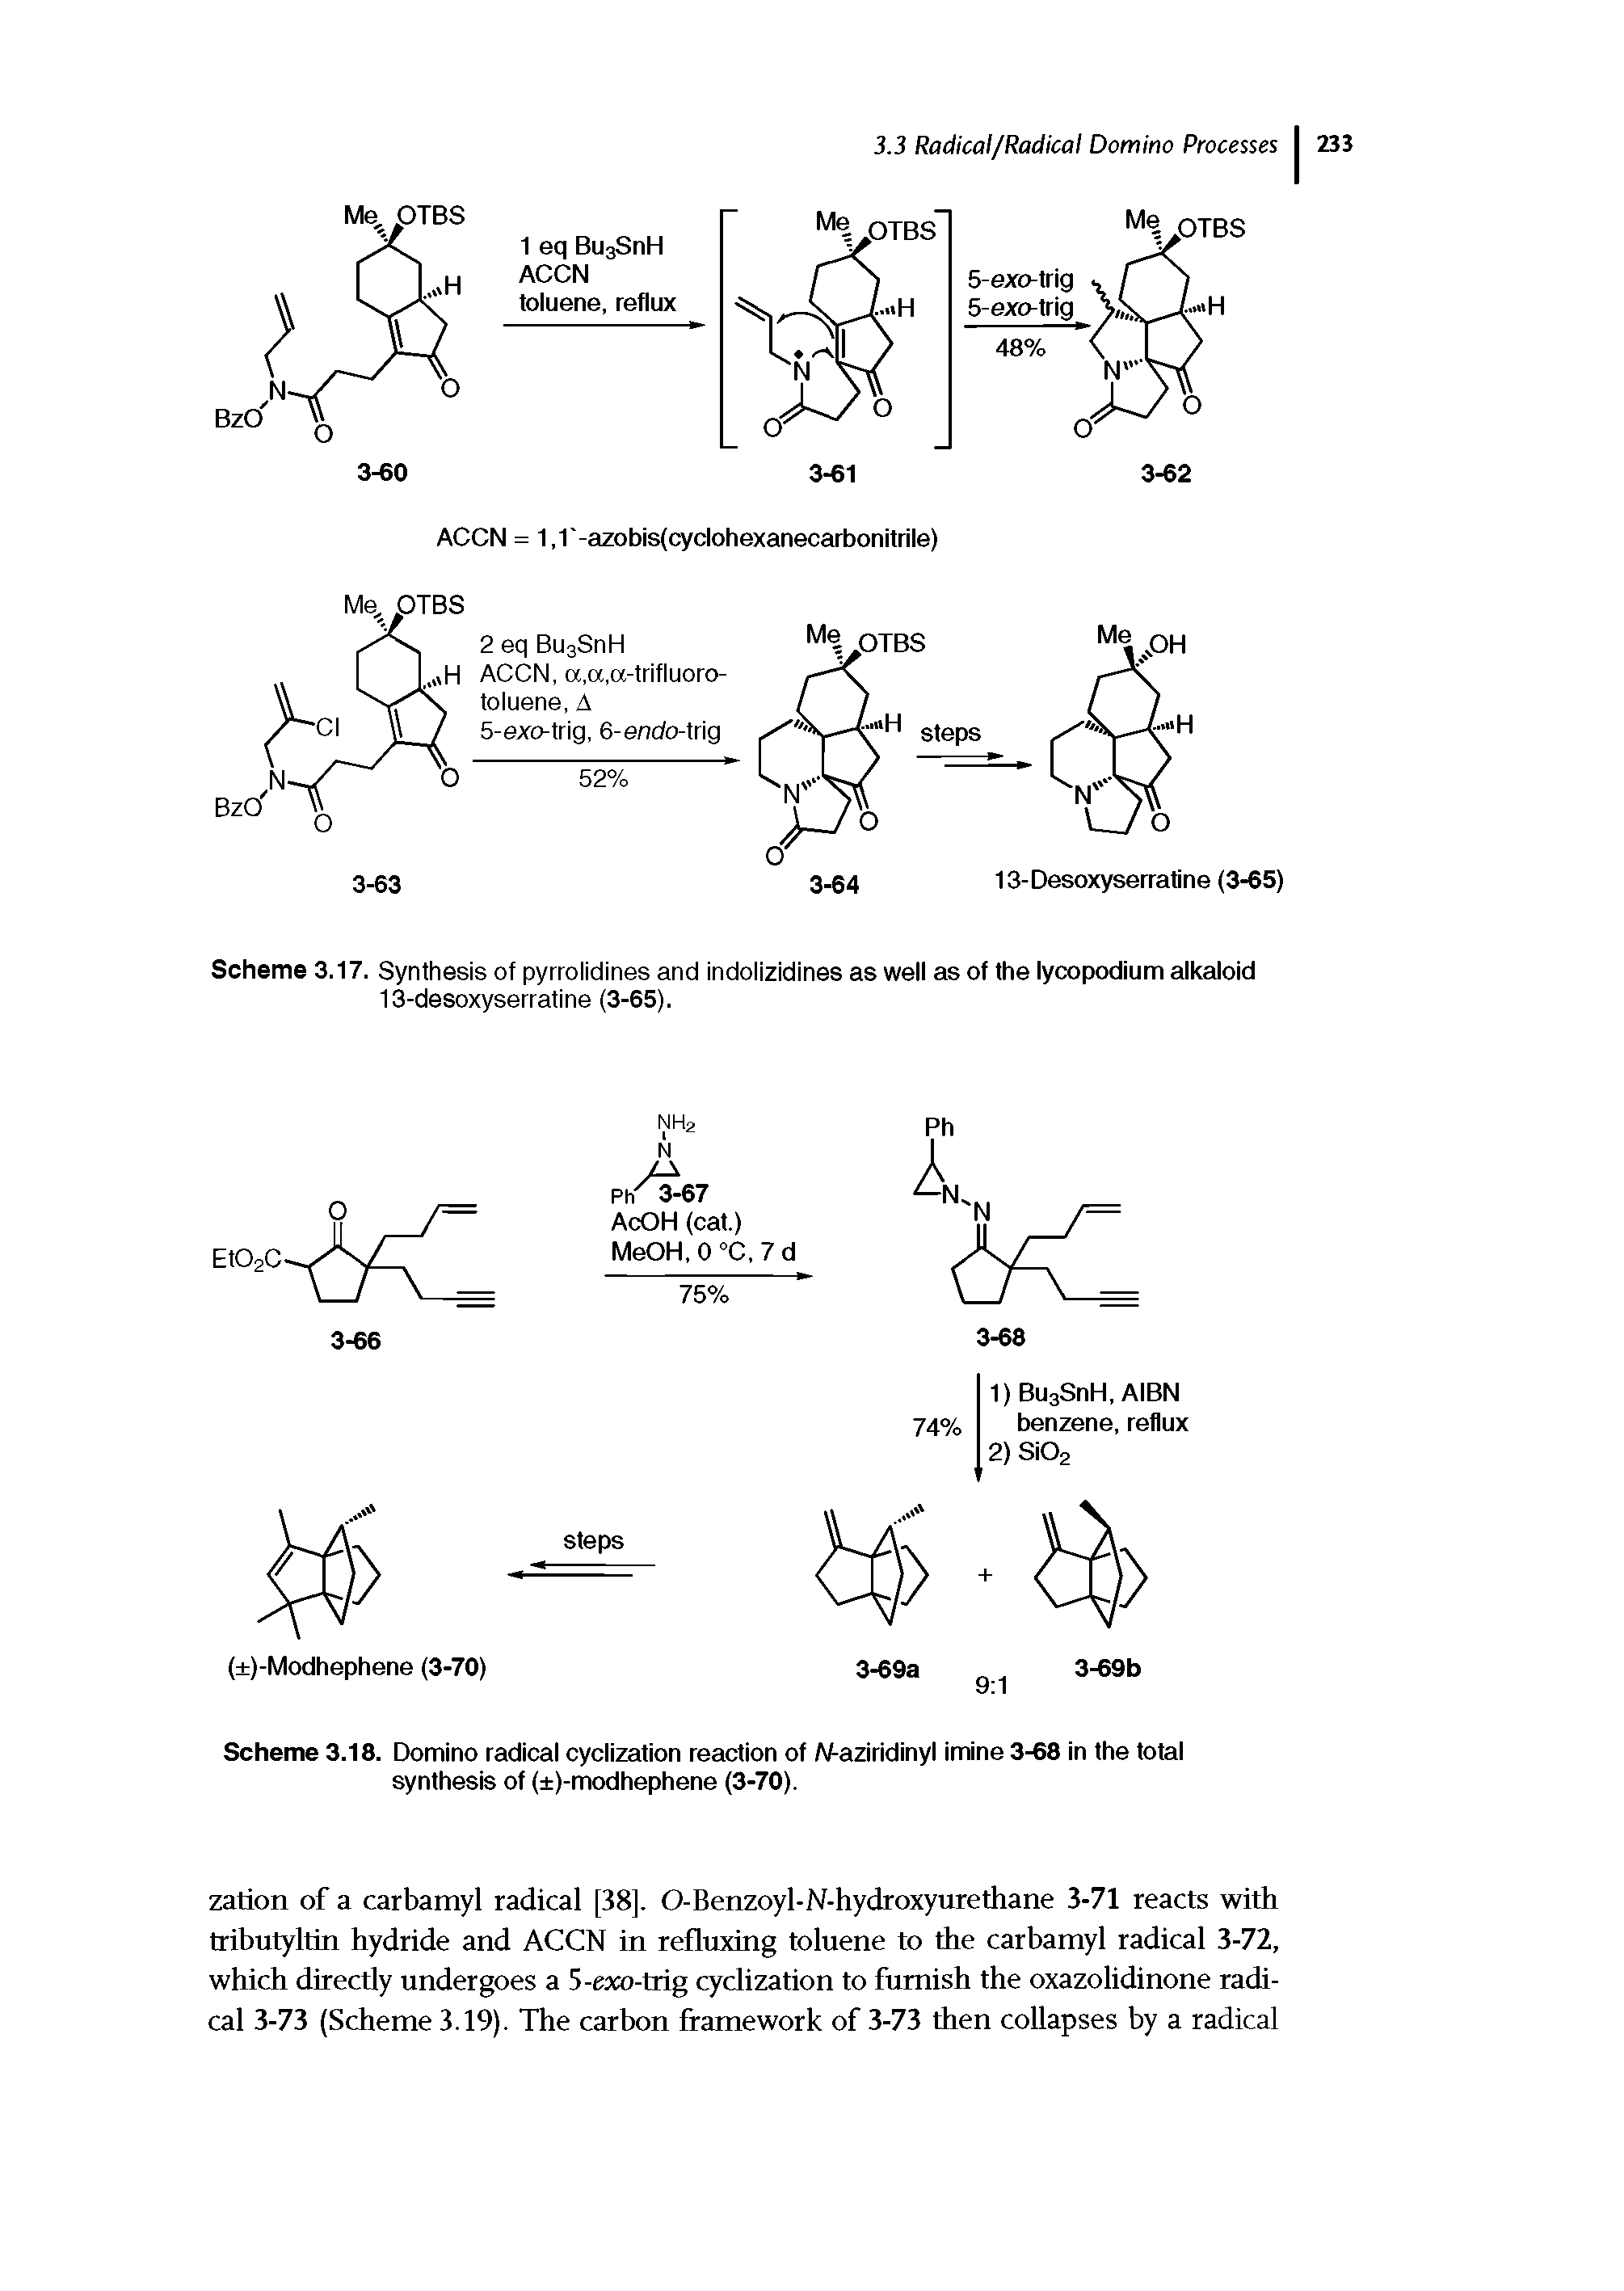 Scheme 3.18. Domino radical cyclization reaction of W-aziridinyl imine 3-68 in the total synthesis of ( )-modhephene (3-70).